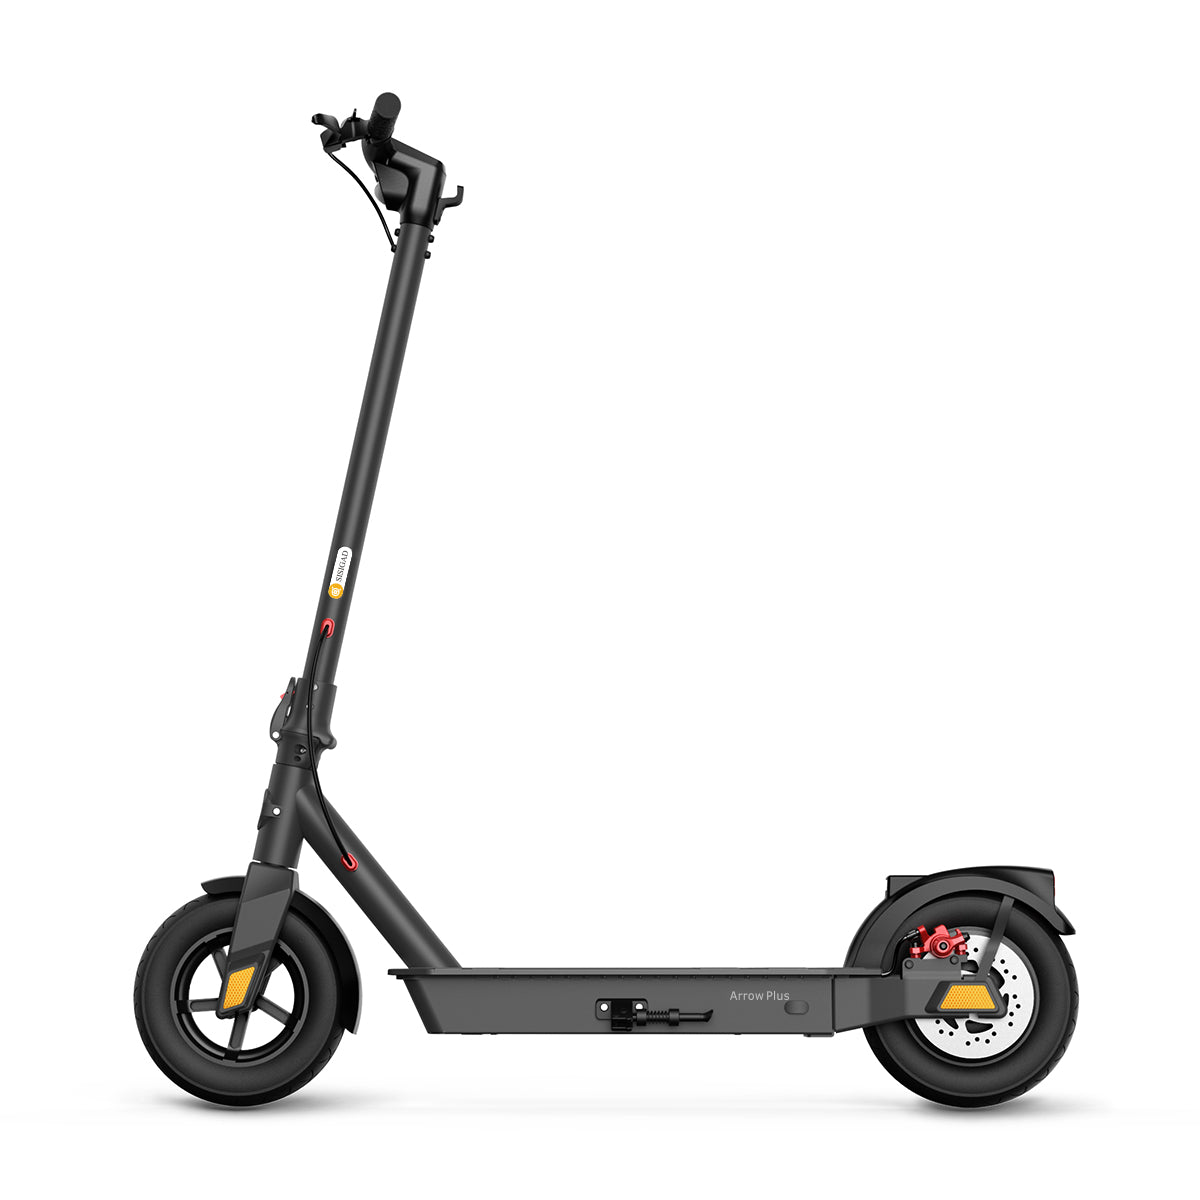 SISIGAD Arrow Plus 10" Fat Tires Electric Scooter - SISIGAD